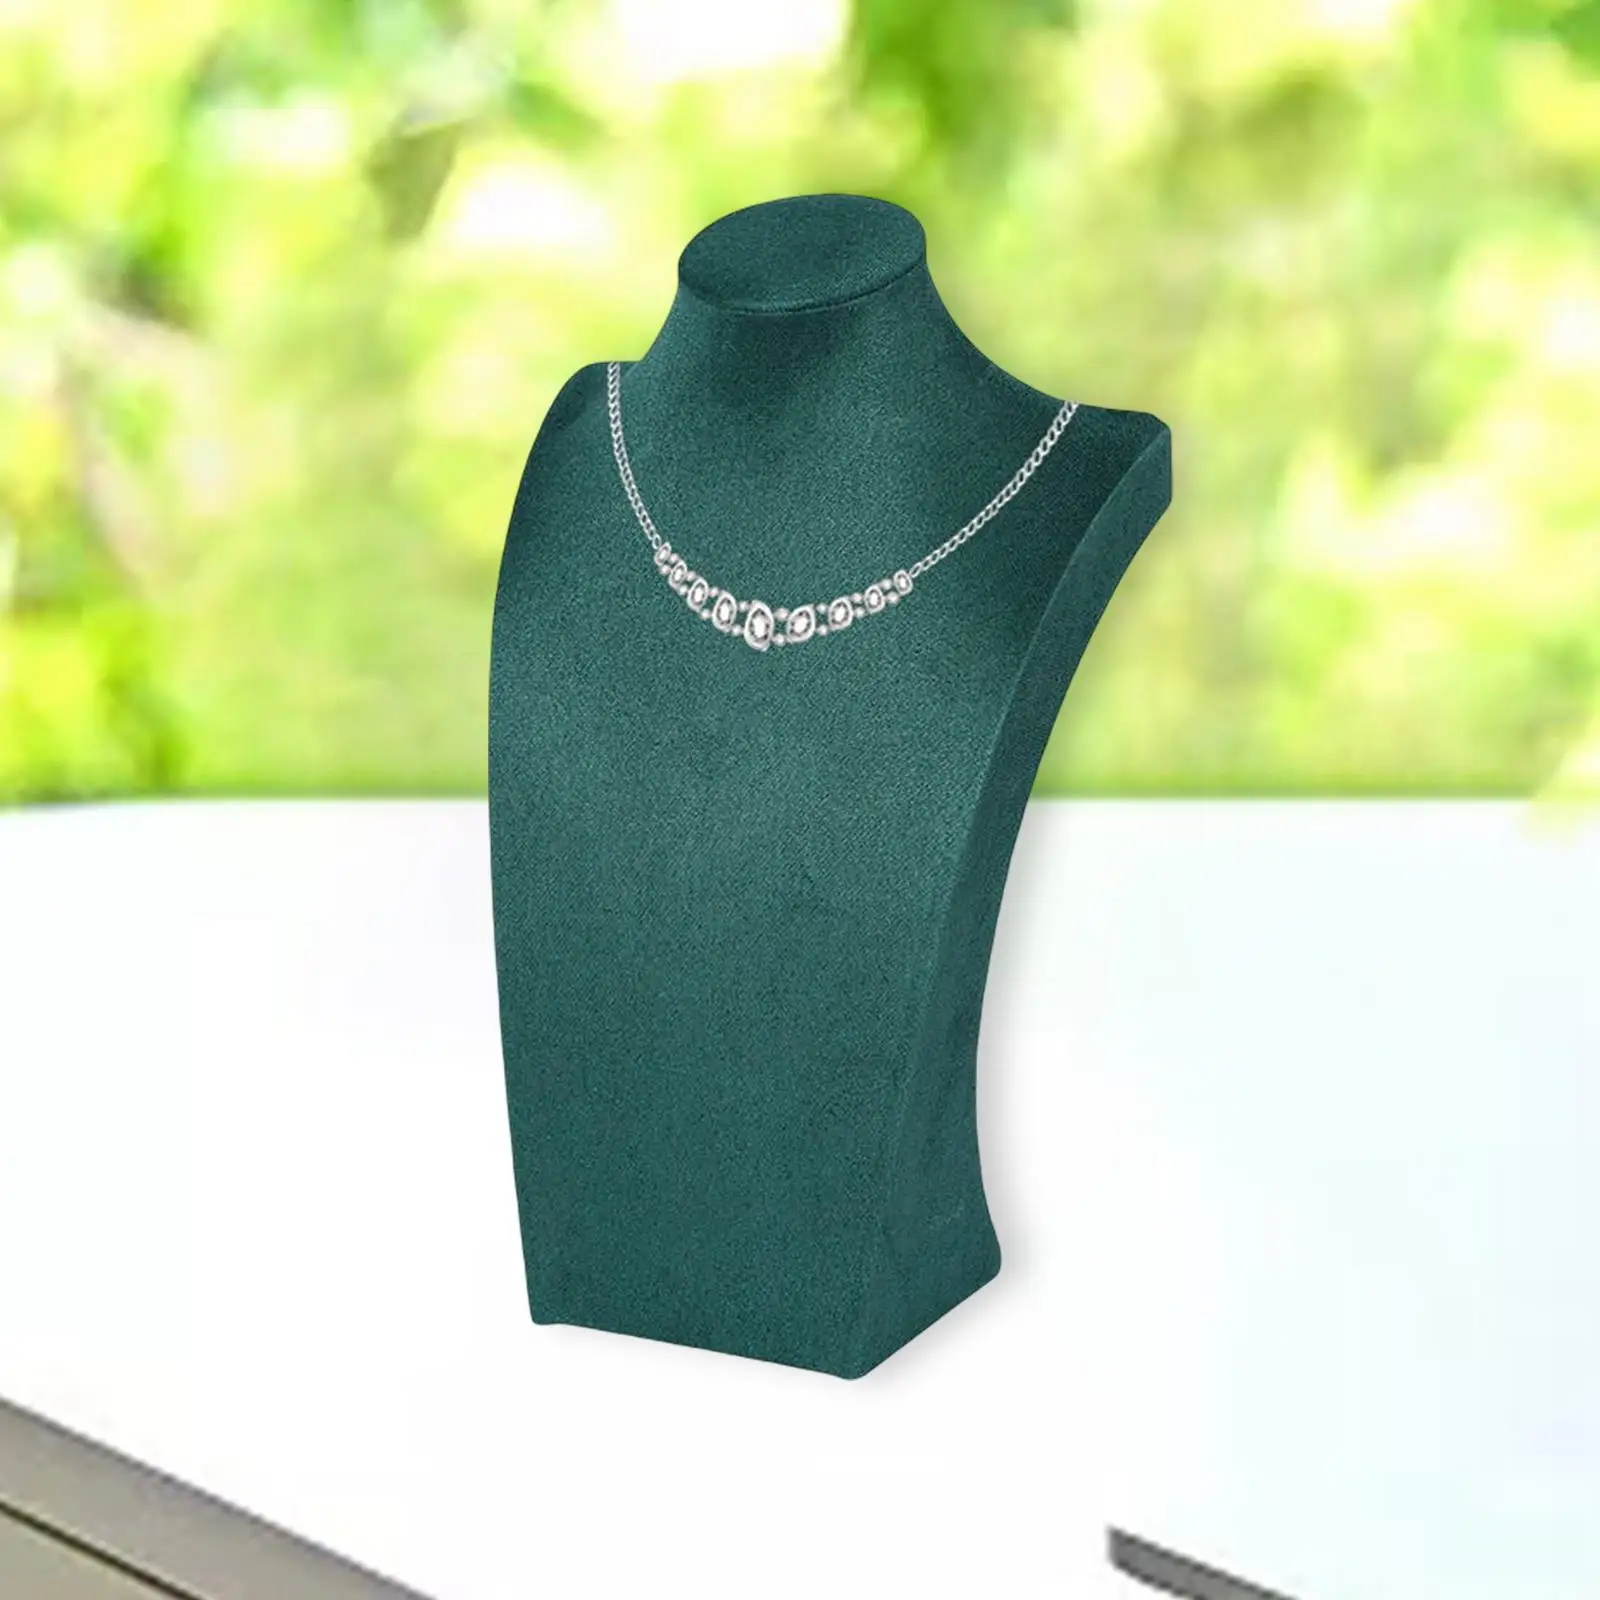 Velvet Necklace Display Pendant Chain Organizer Necklace Jewelry Display Model Bust Stand for Fair Shelves Business 